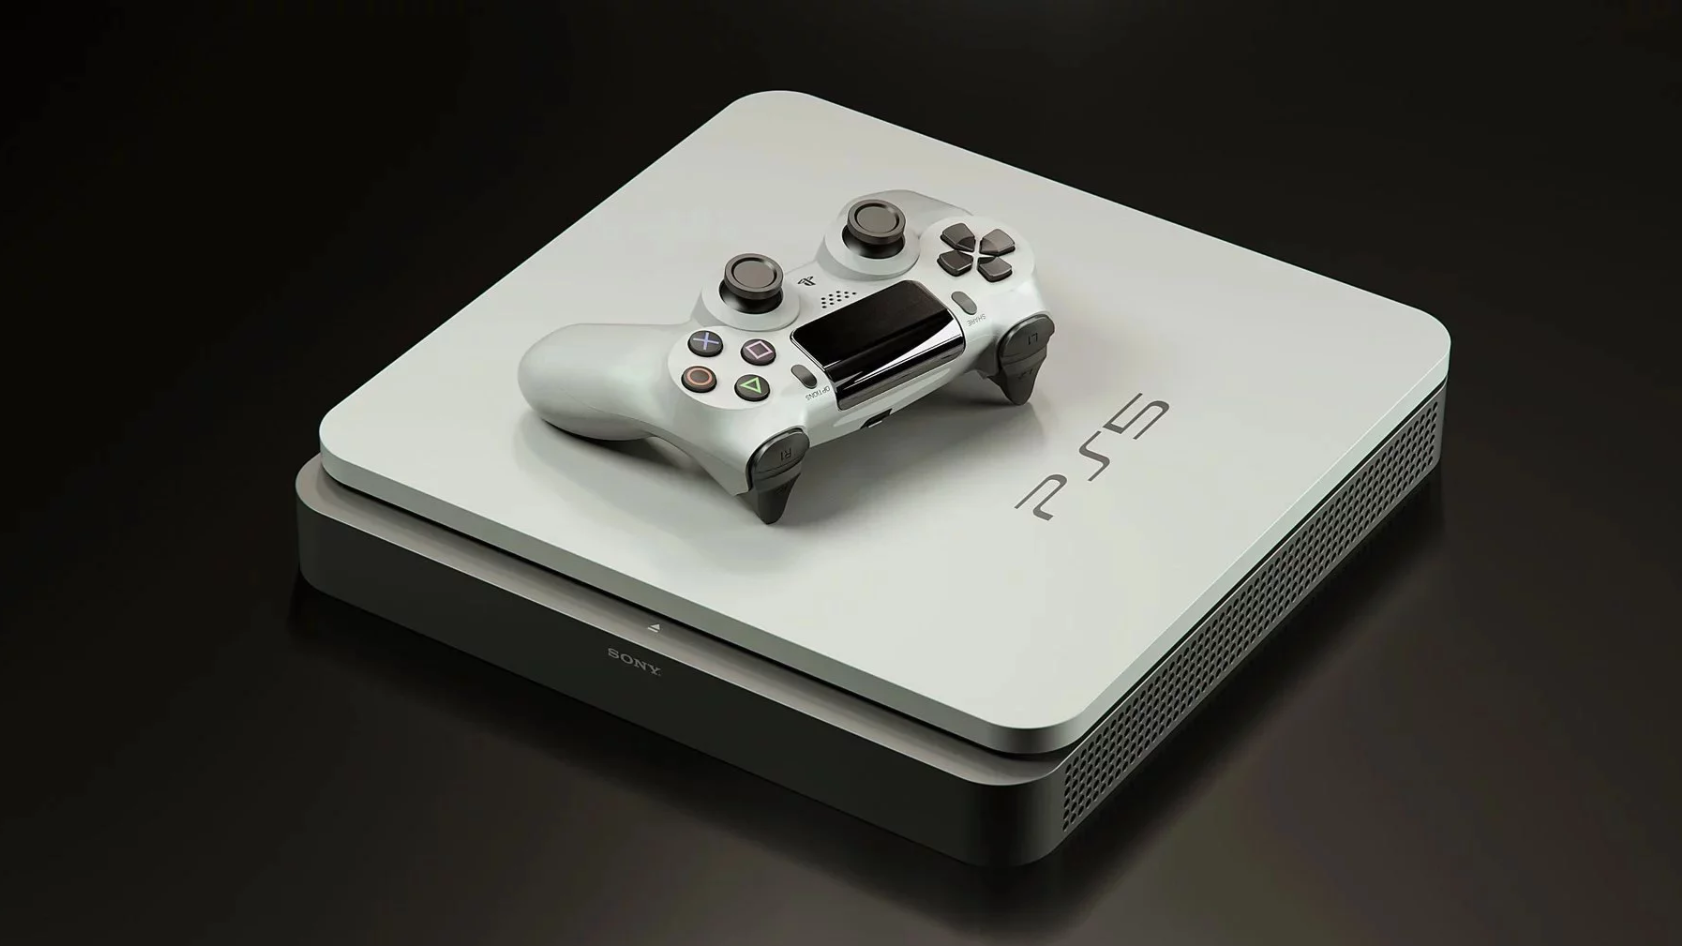 sony ps5 official